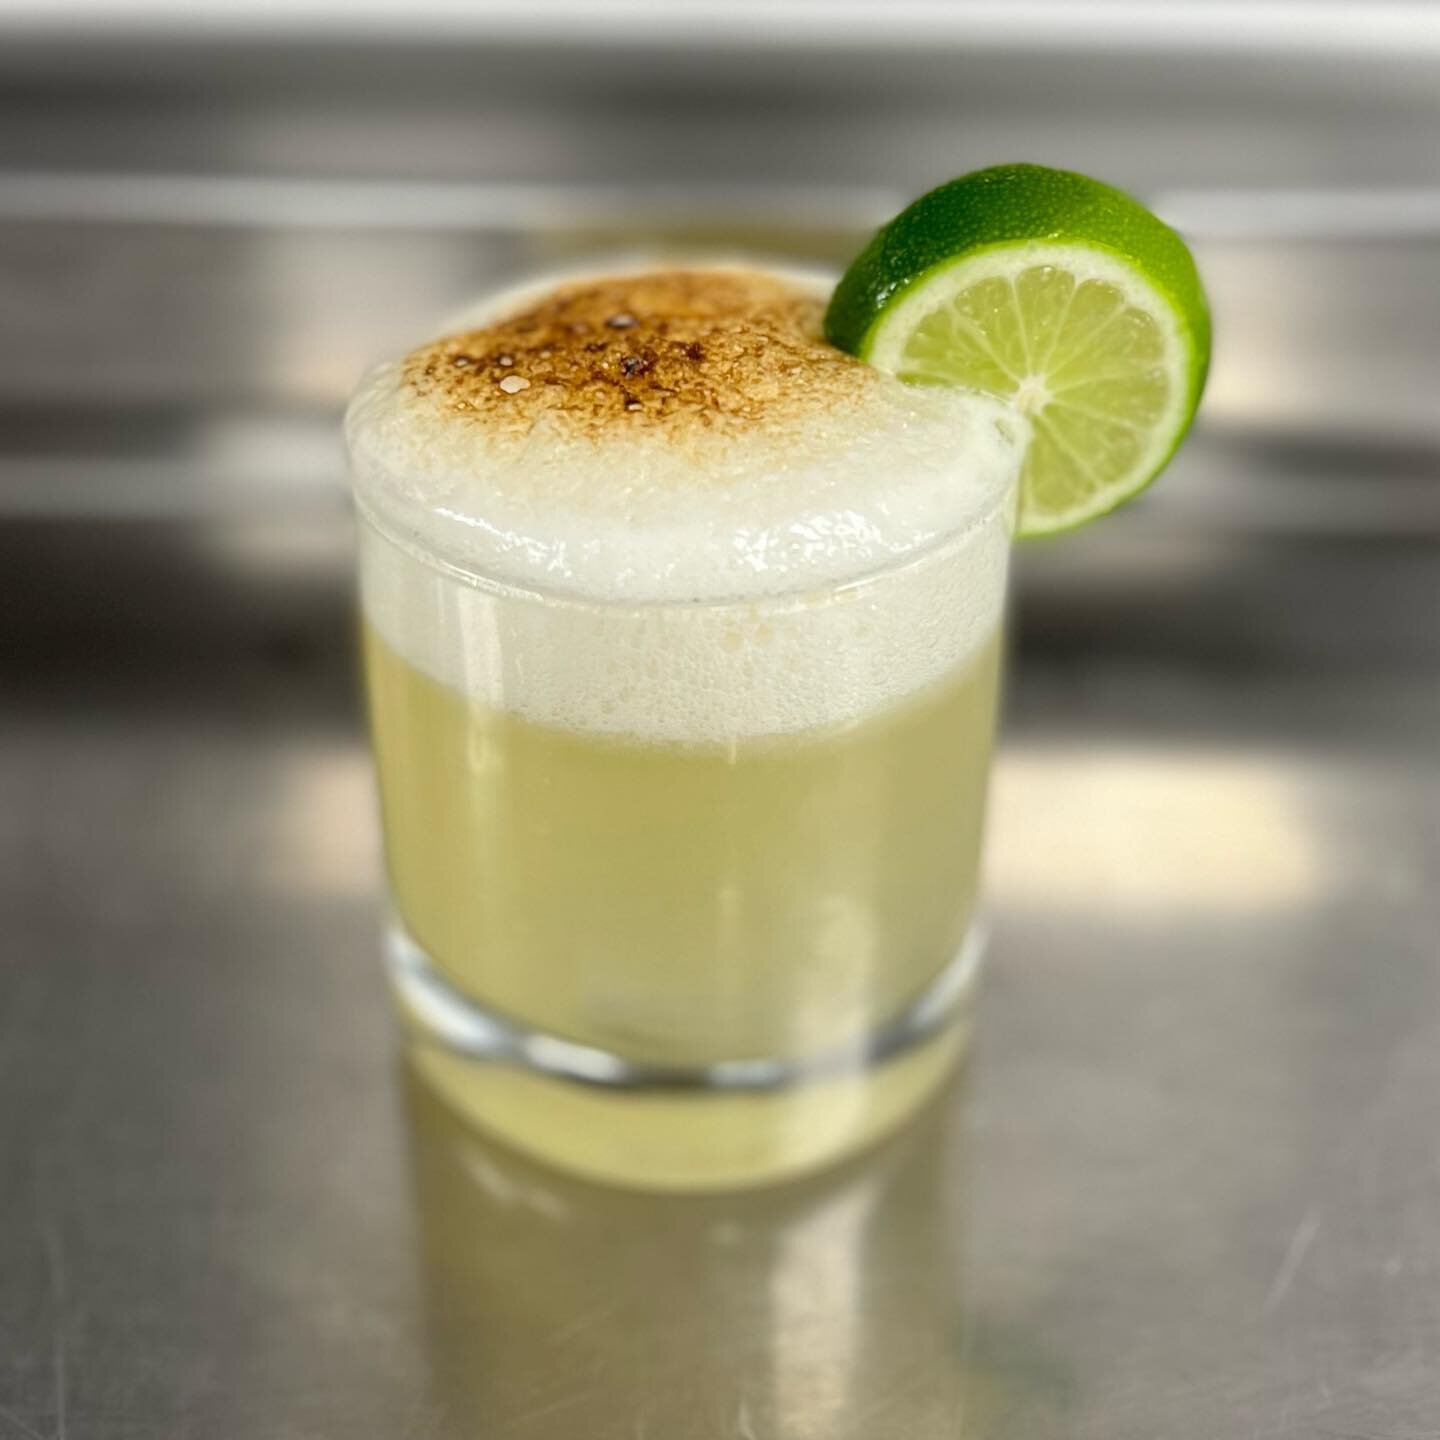 Tonight&rsquo;s special and a sneak peak at the upcoming menu:

Moroccan Mint Mojito

2 oz Rum
.5 oz Lime juice
.5 oz Moroccan Mint syrup

Finished with a br&ucirc;l&eacute;ed Gran Marnier citrus salt foam